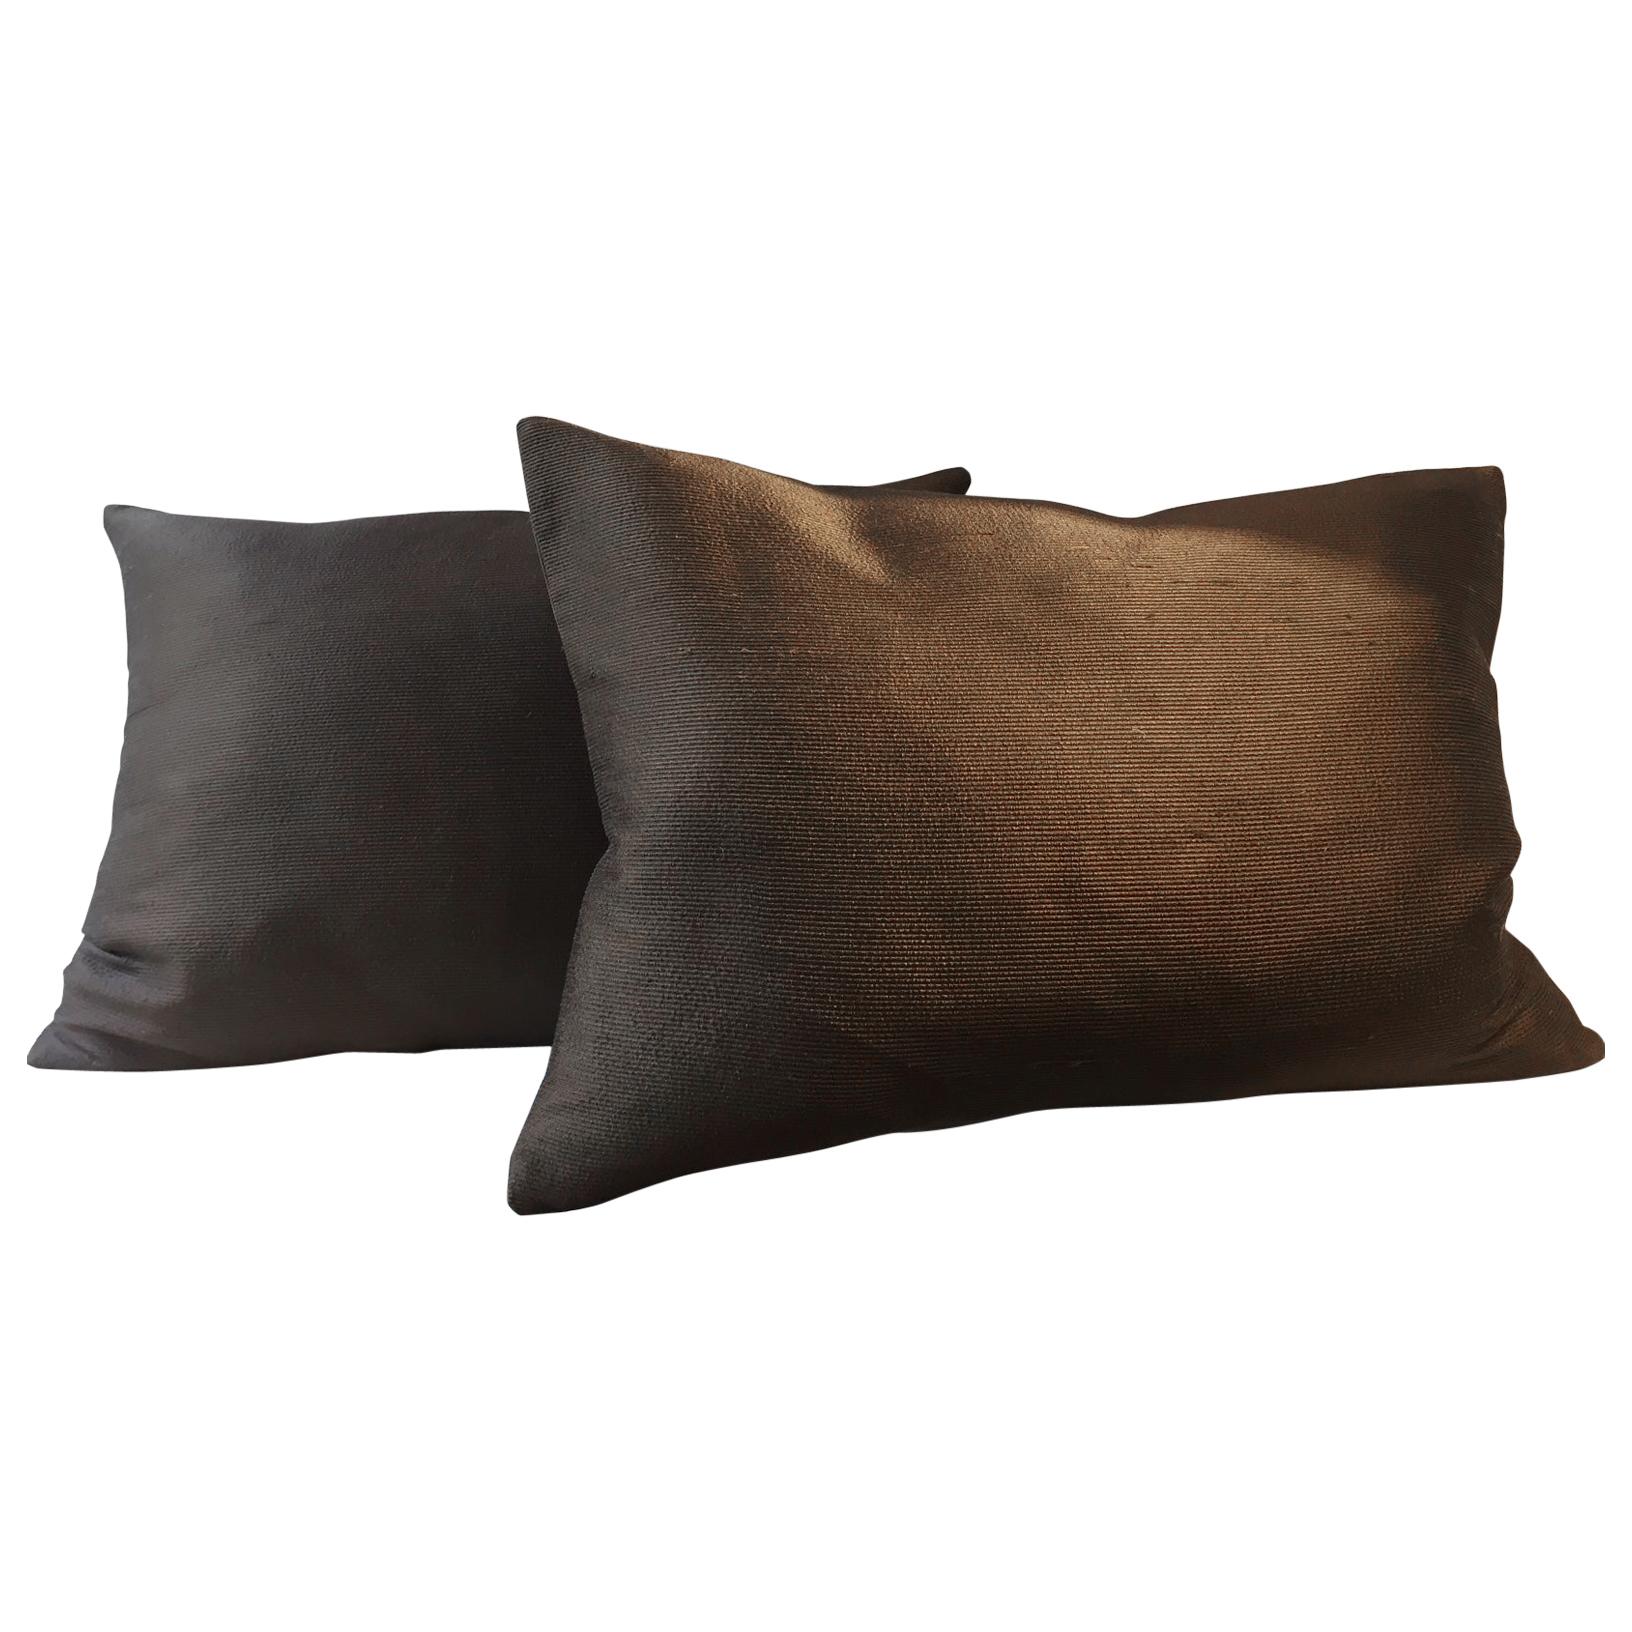 Pair of Cushions in Repp Silk Color Chocolate Brown